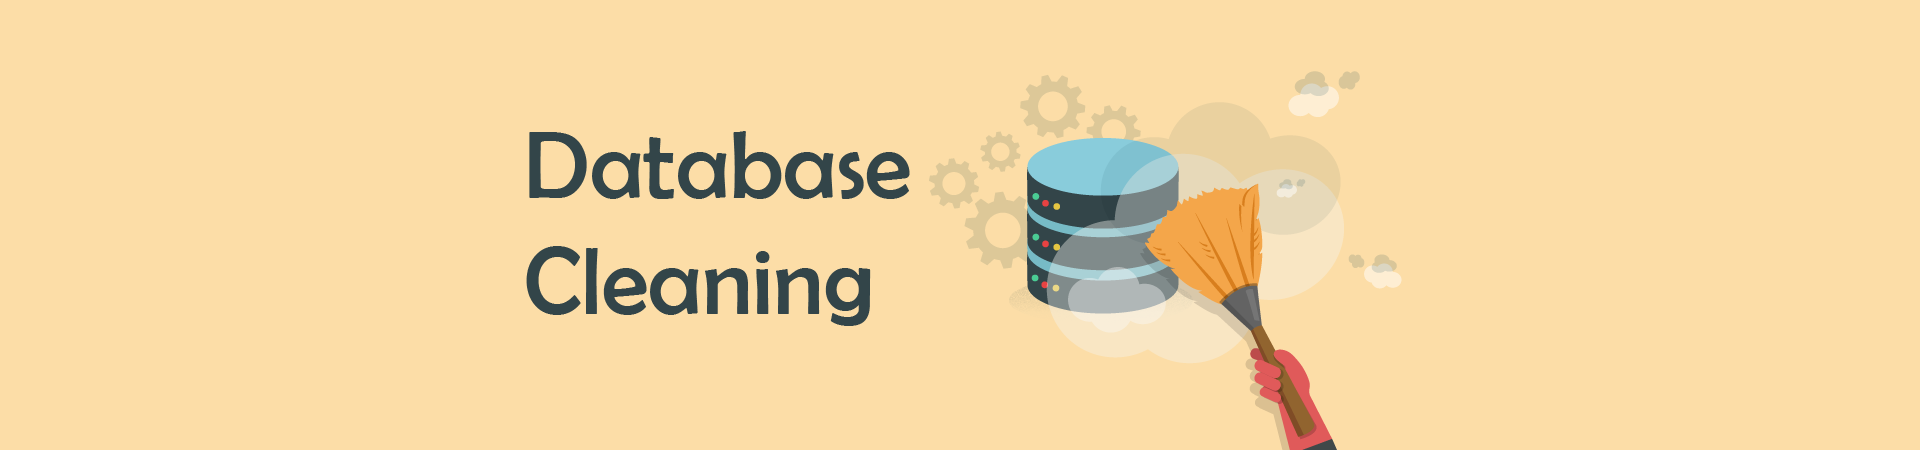 Database Cleaning Services